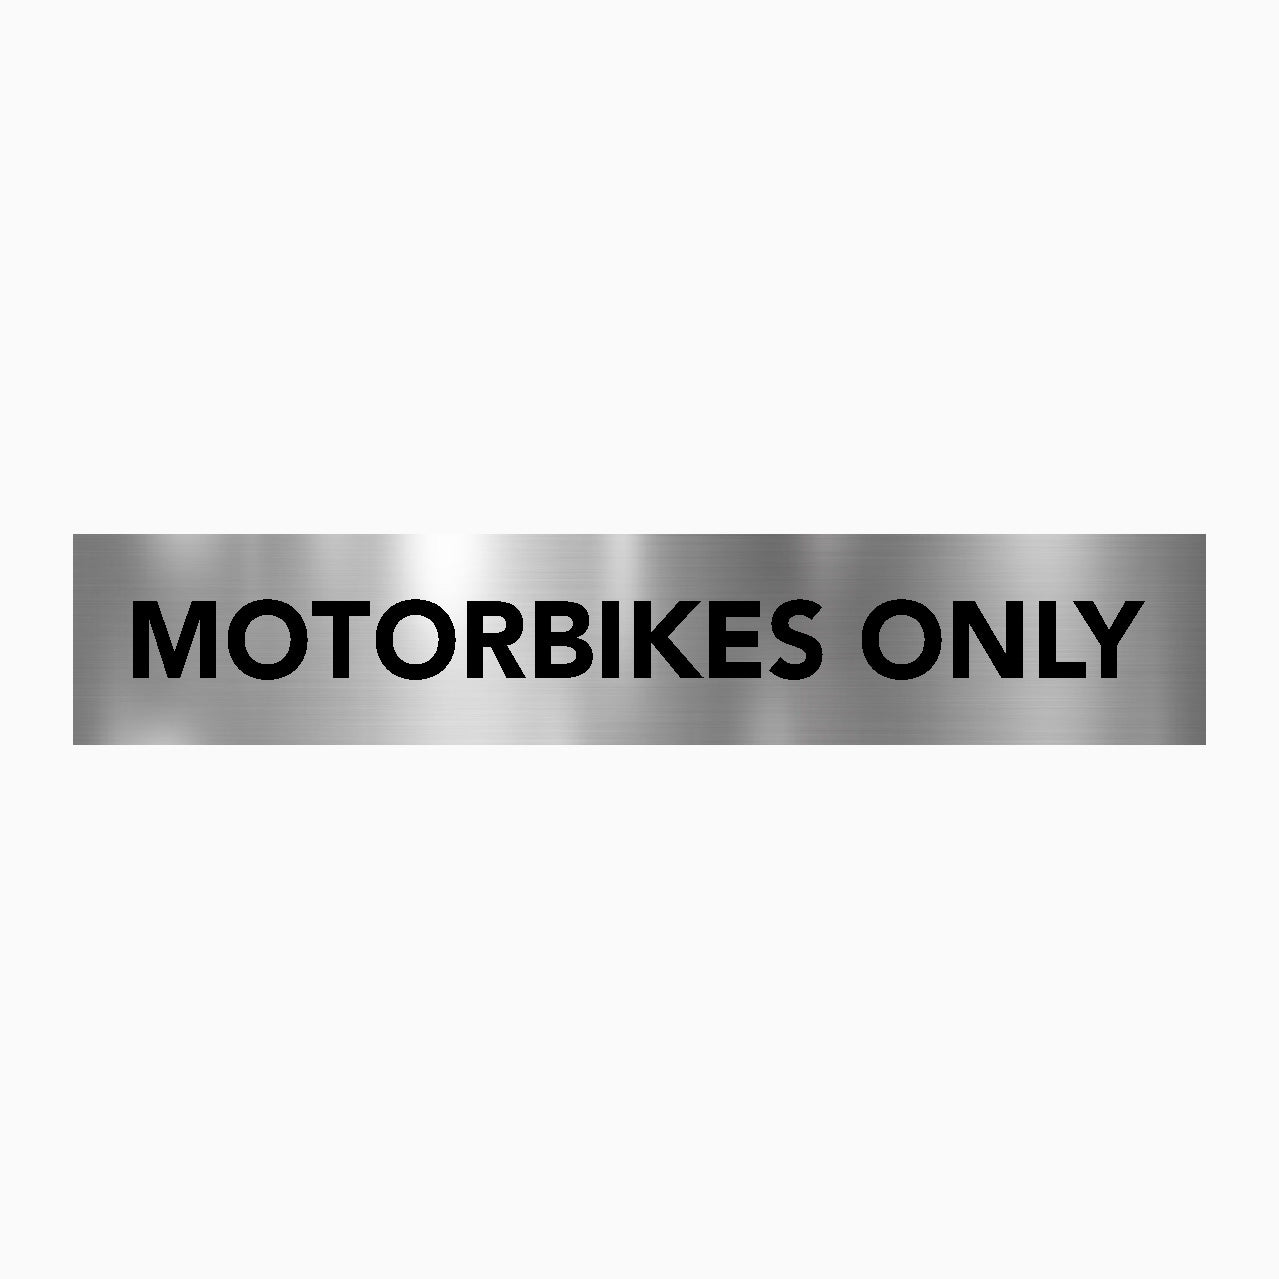 MOTORBIKES ONLY SIGN - STATUTORY SIGN